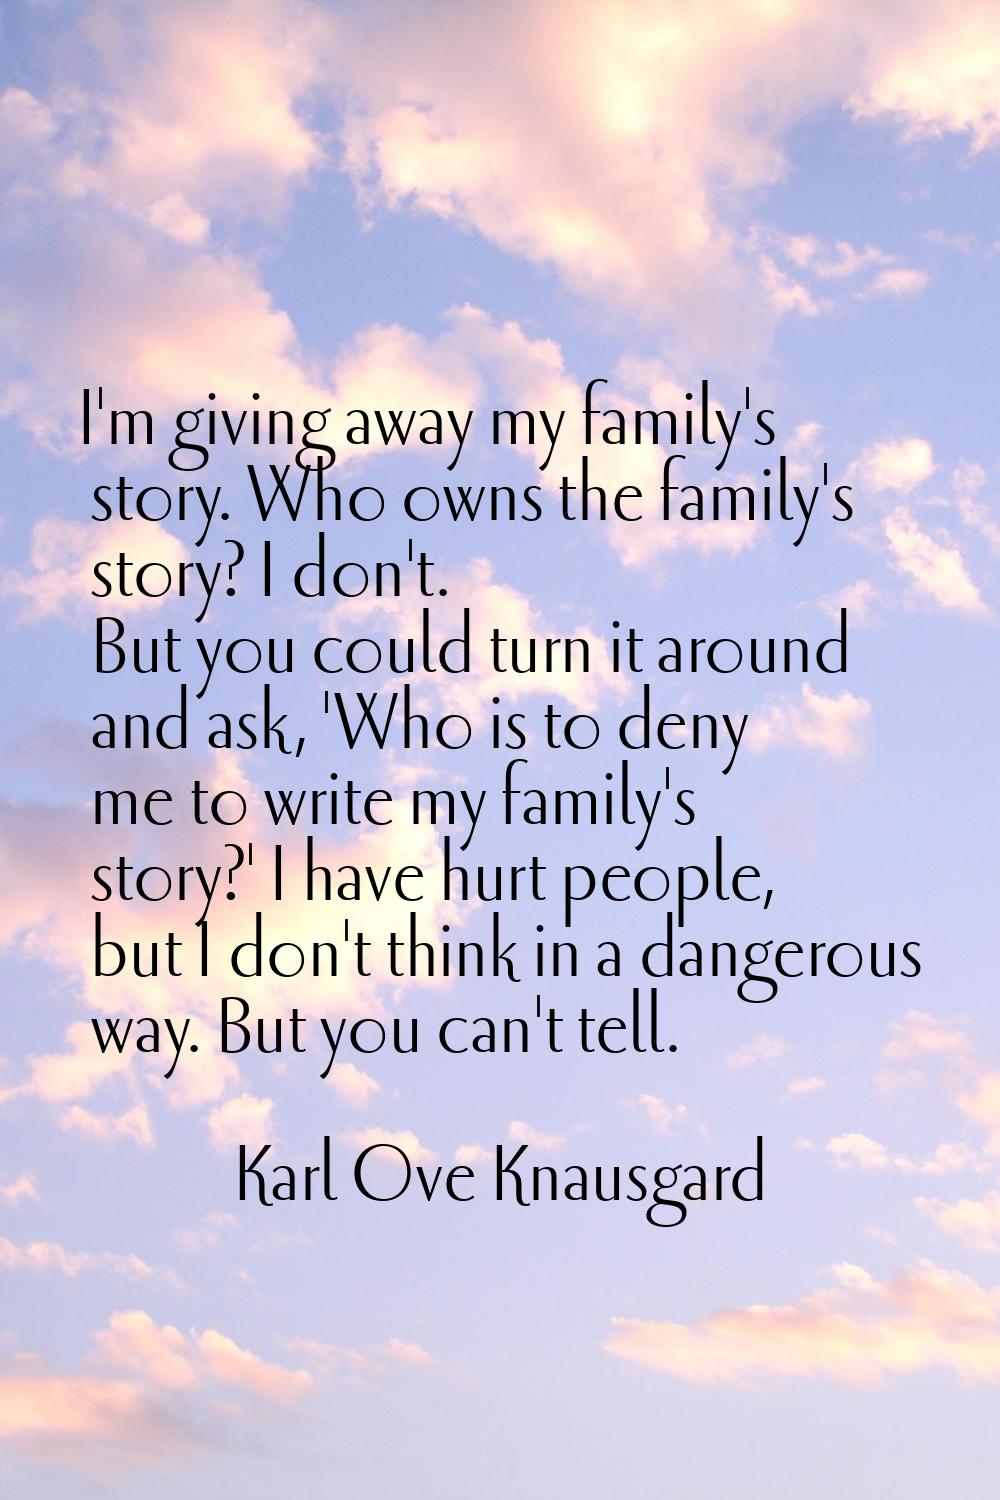 I'm giving away my family's story. Who owns the family's story? I don't. But you could turn it arou